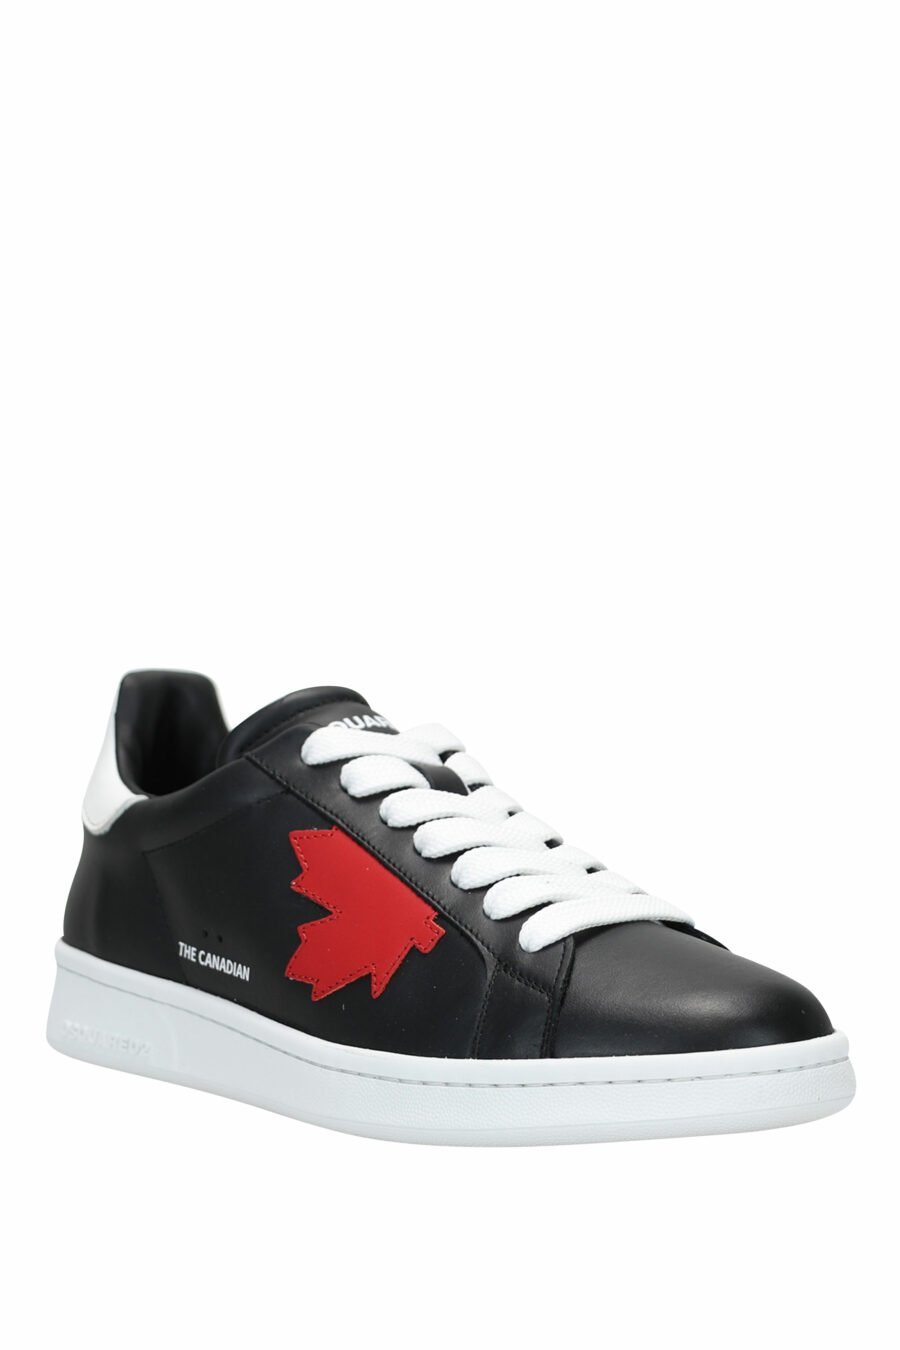 Black trainers with red leaf and white sole - 8055777240977 1